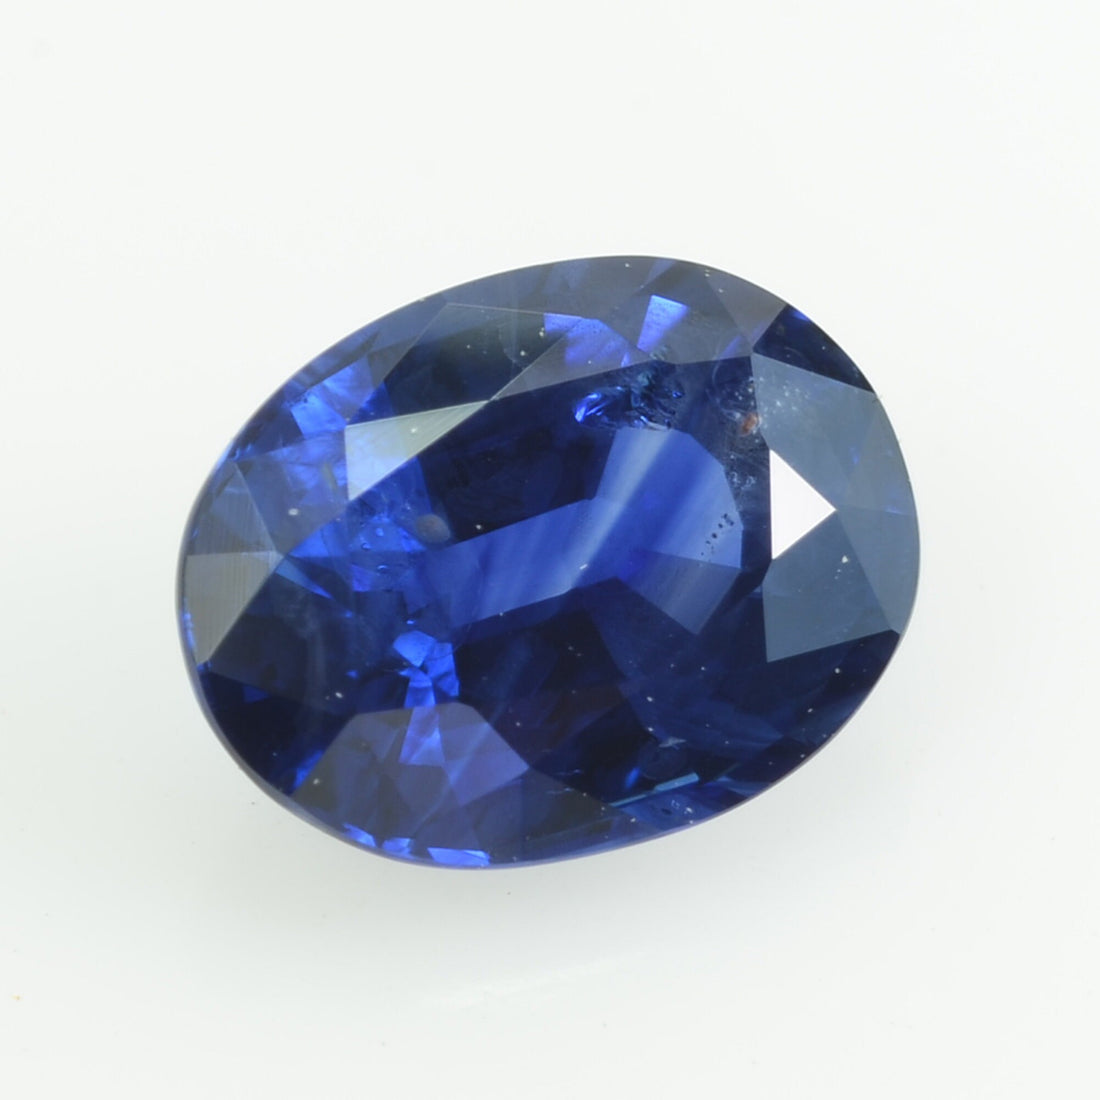 1.11 cts natural blue sapphire loose gemstone oval cut AGL Certified